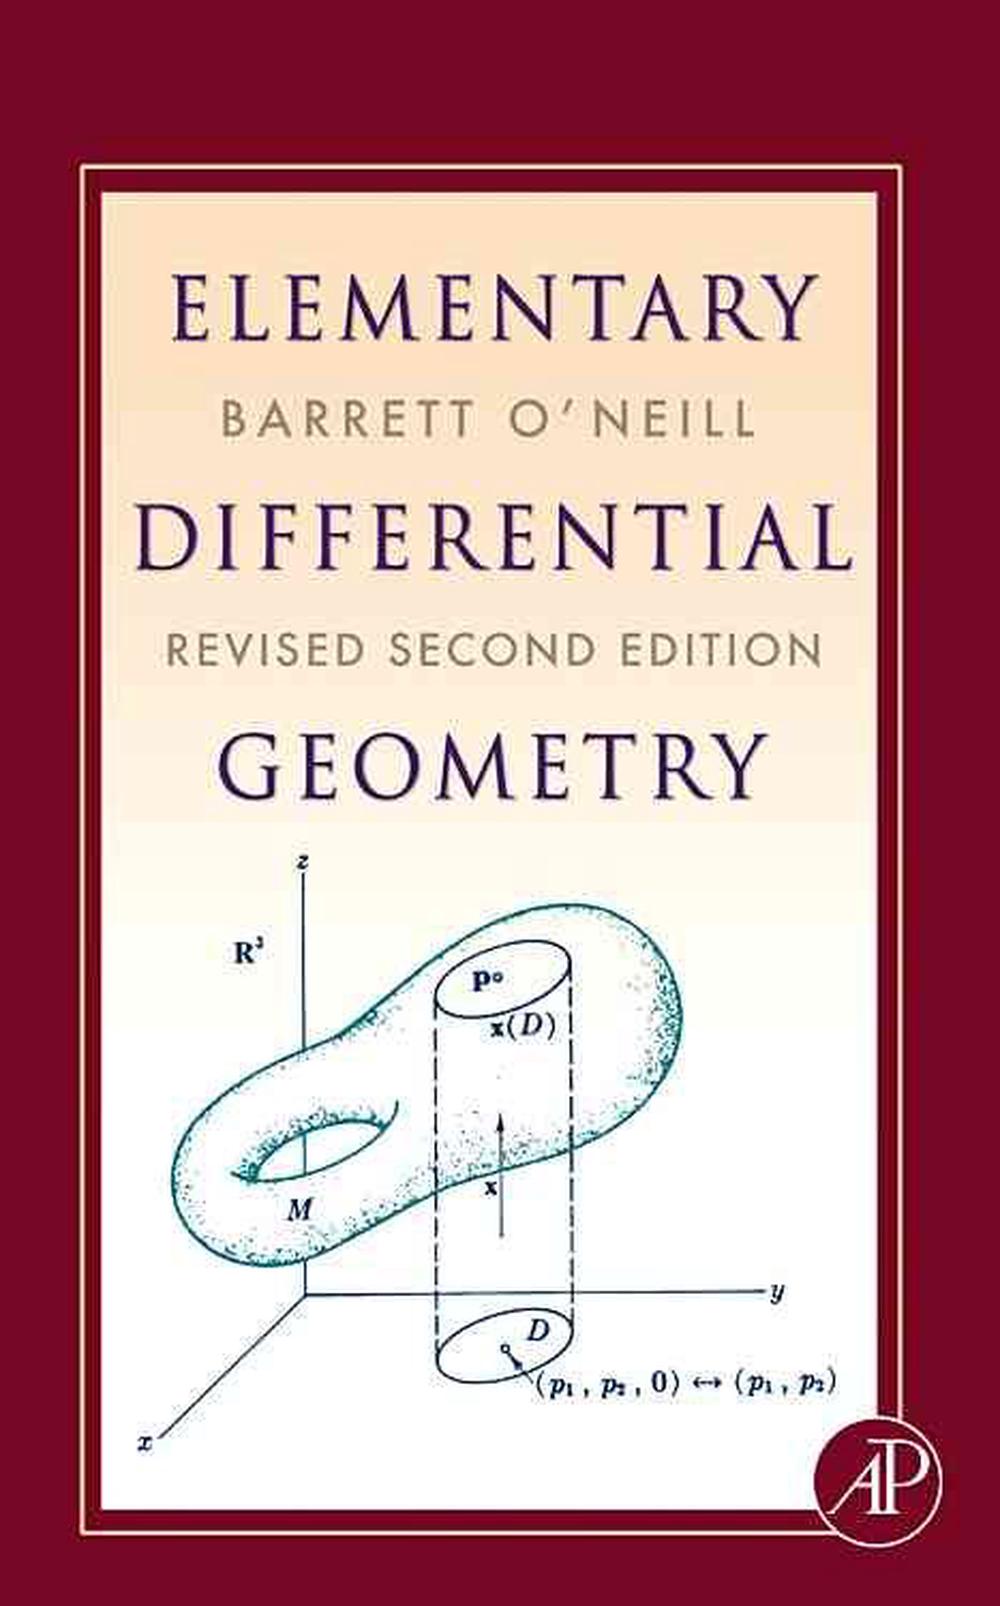 Elementary Differential Geometry by Barrett O'Neill (English) Hardcover